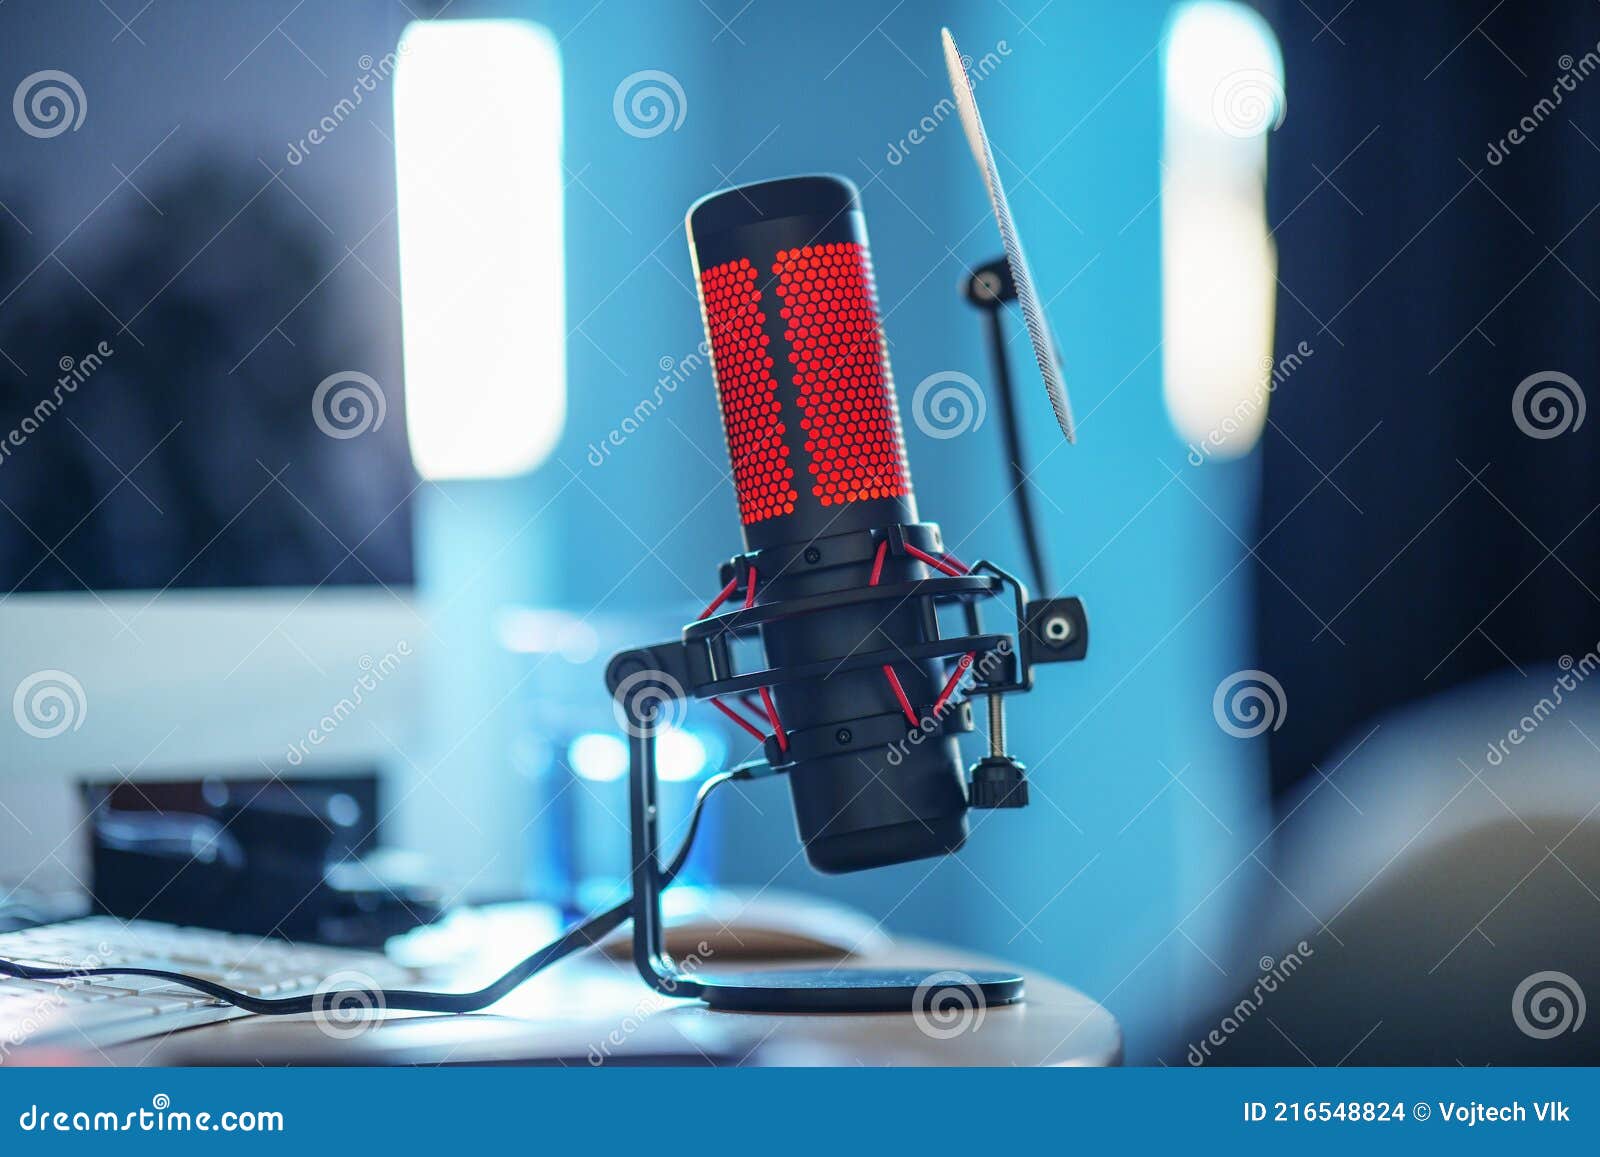 797 Online Live Studio Desk Stock Photos - Free & Royalty-Free Stock Photos from